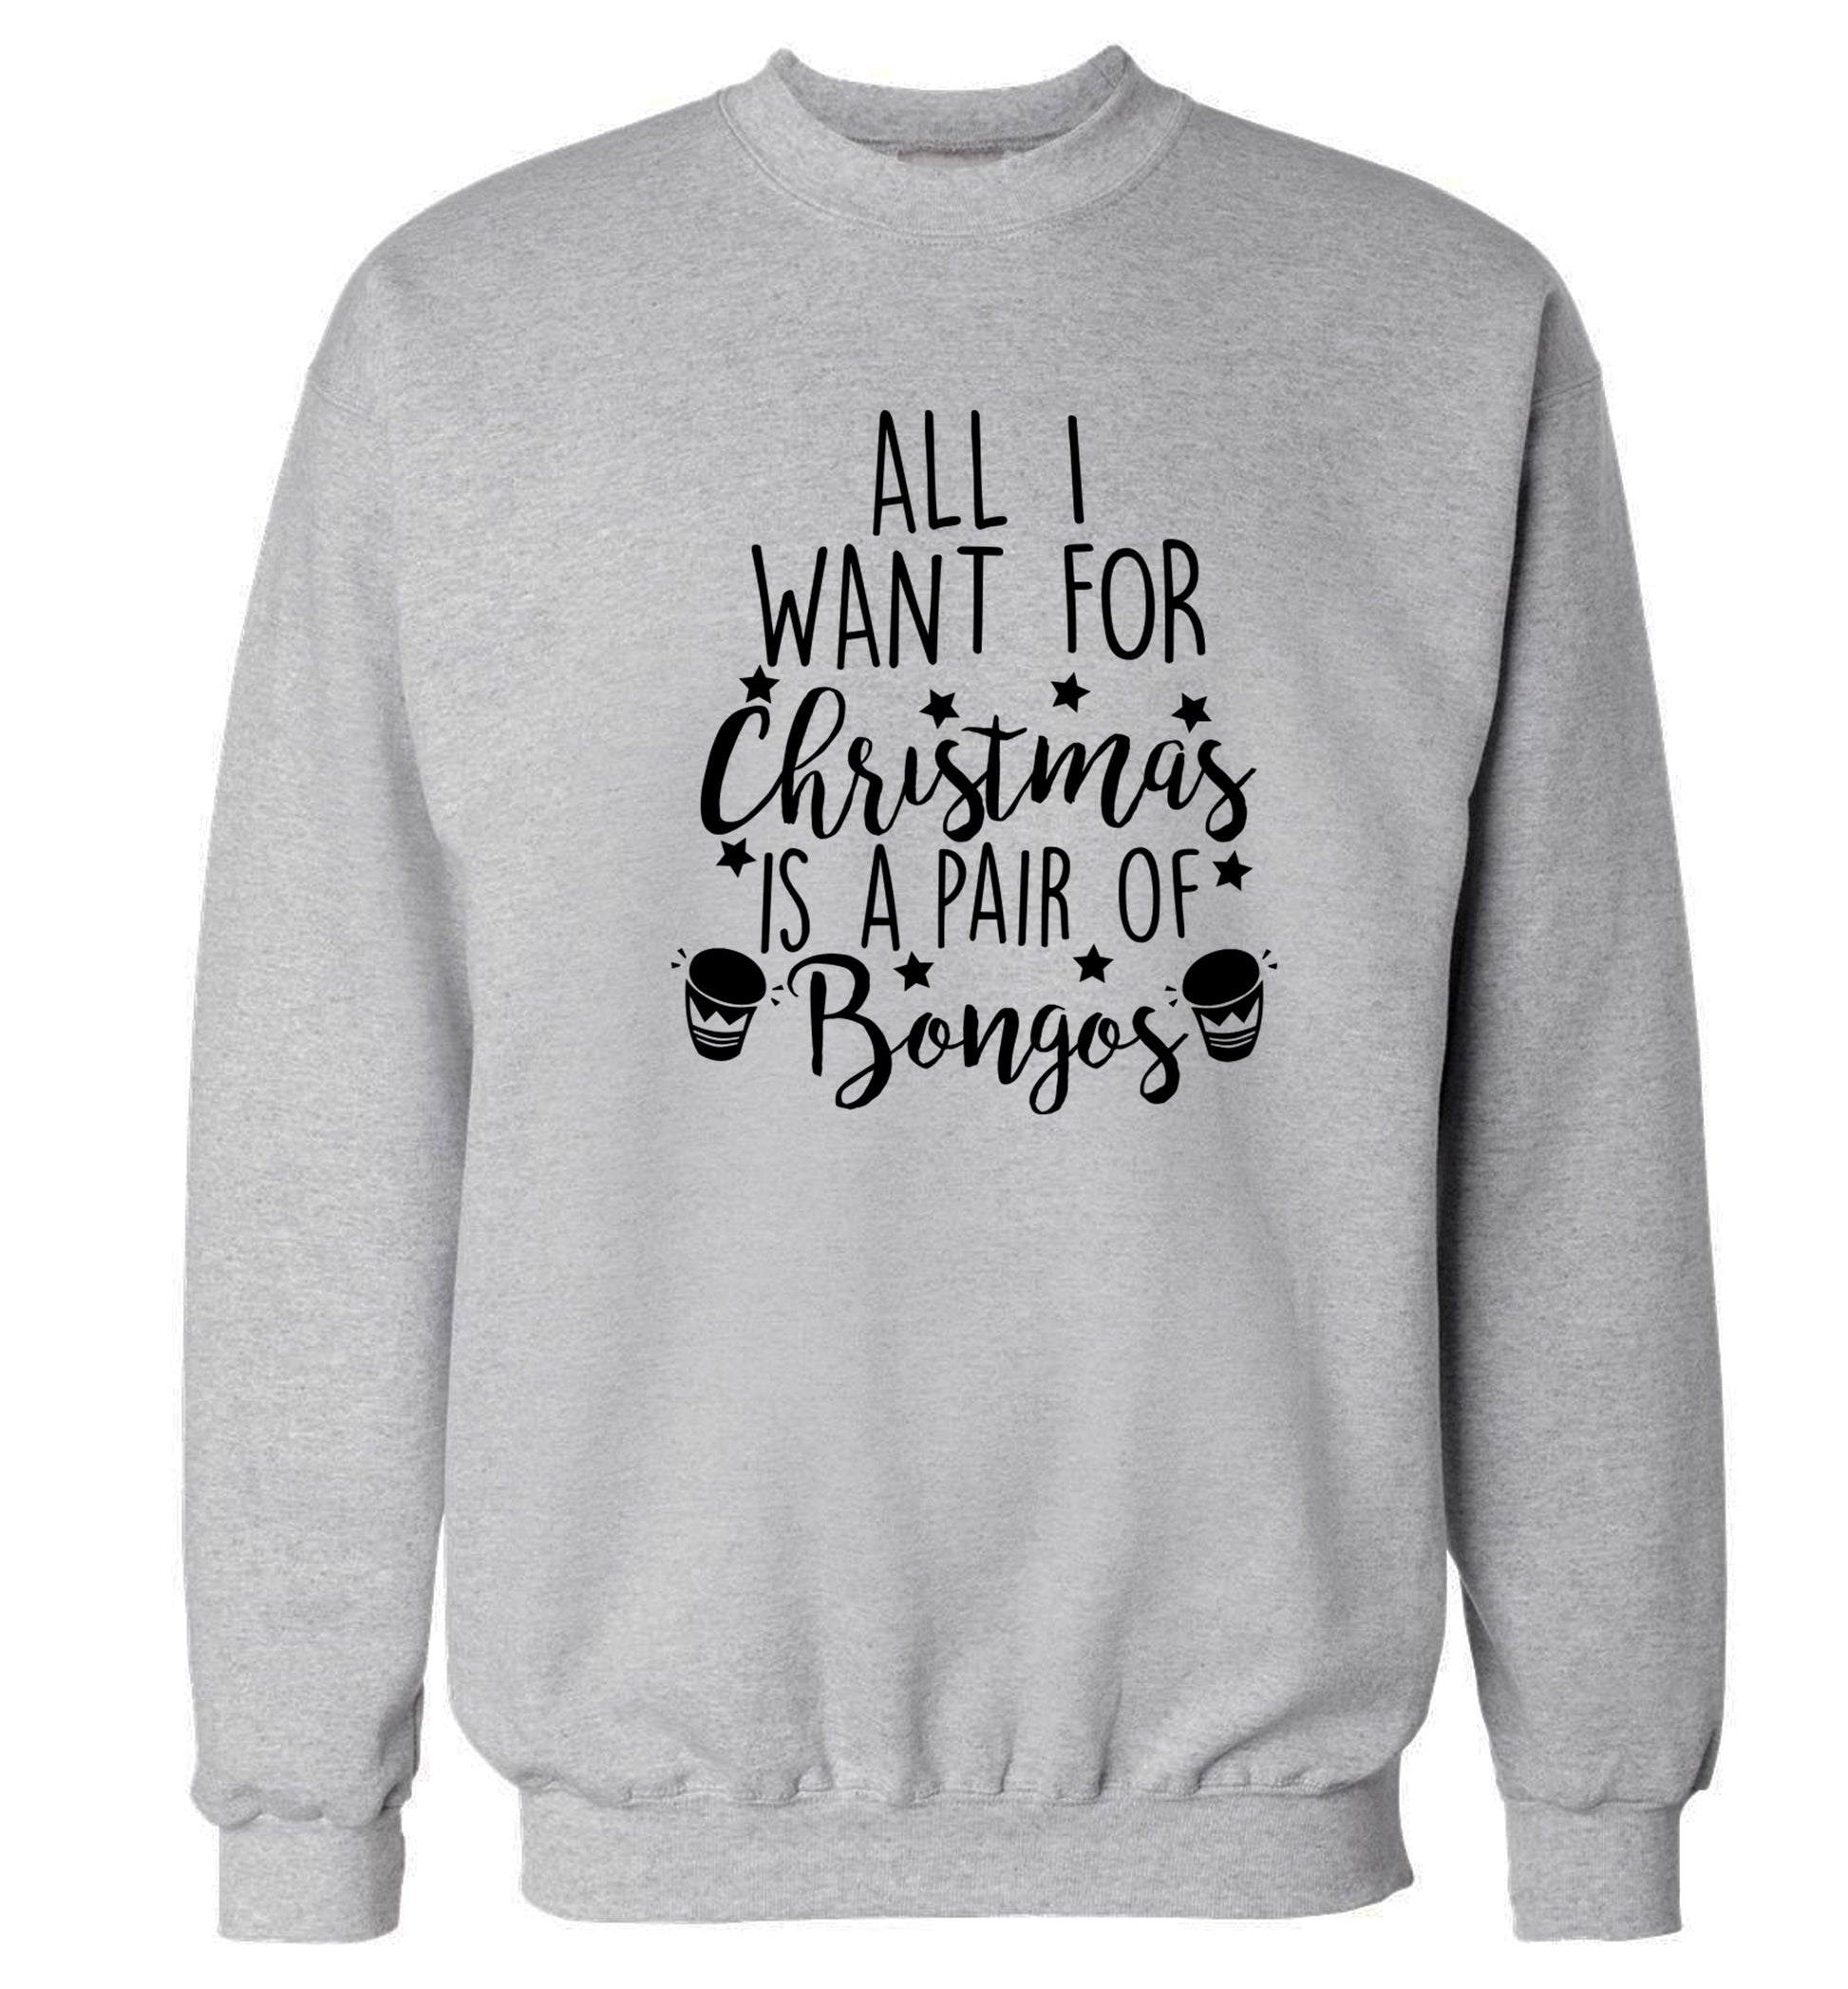 All I want for Christmas is a pair of bongos! Adult's unisex grey Sweater 2XL